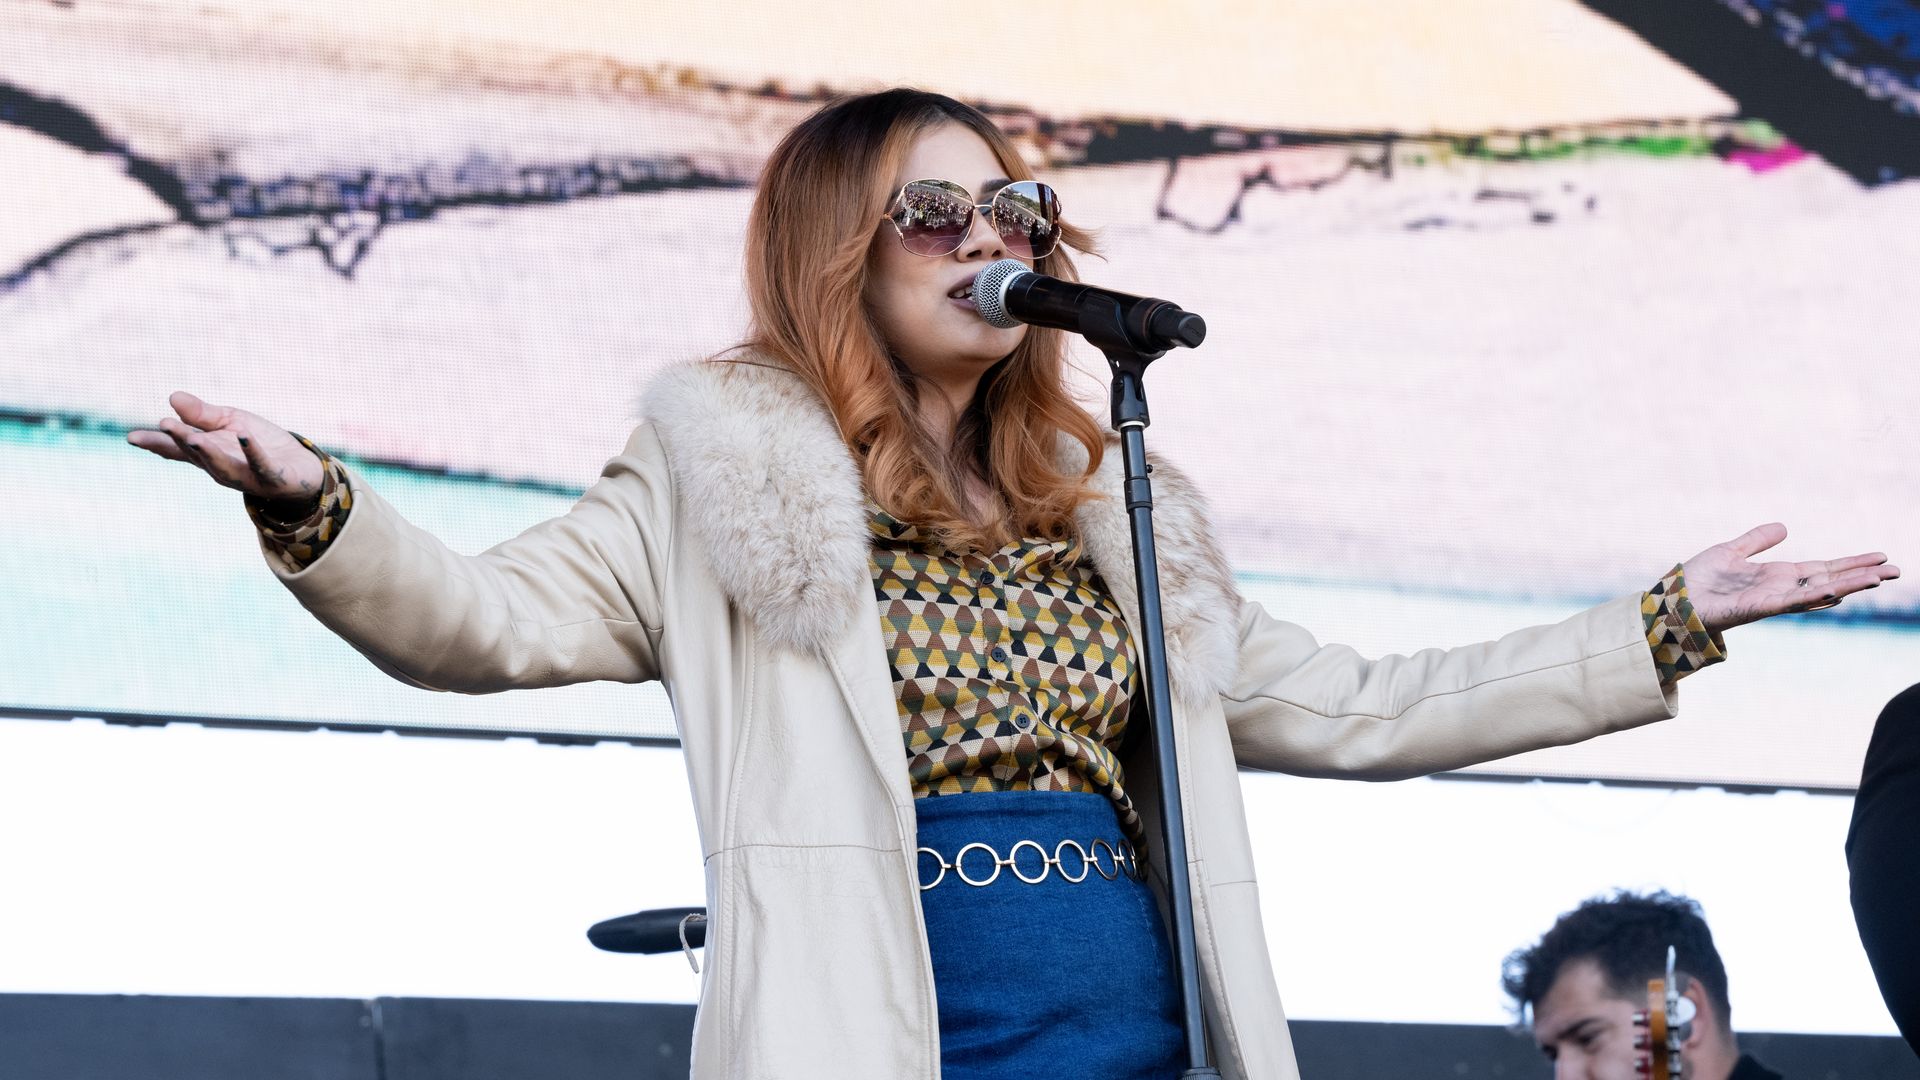 Singer Trish Toledo performs onstage during Once Upon a Time in LA Music Festival at Banc of California Stadium on December 18, 2021 in Los Angeles.